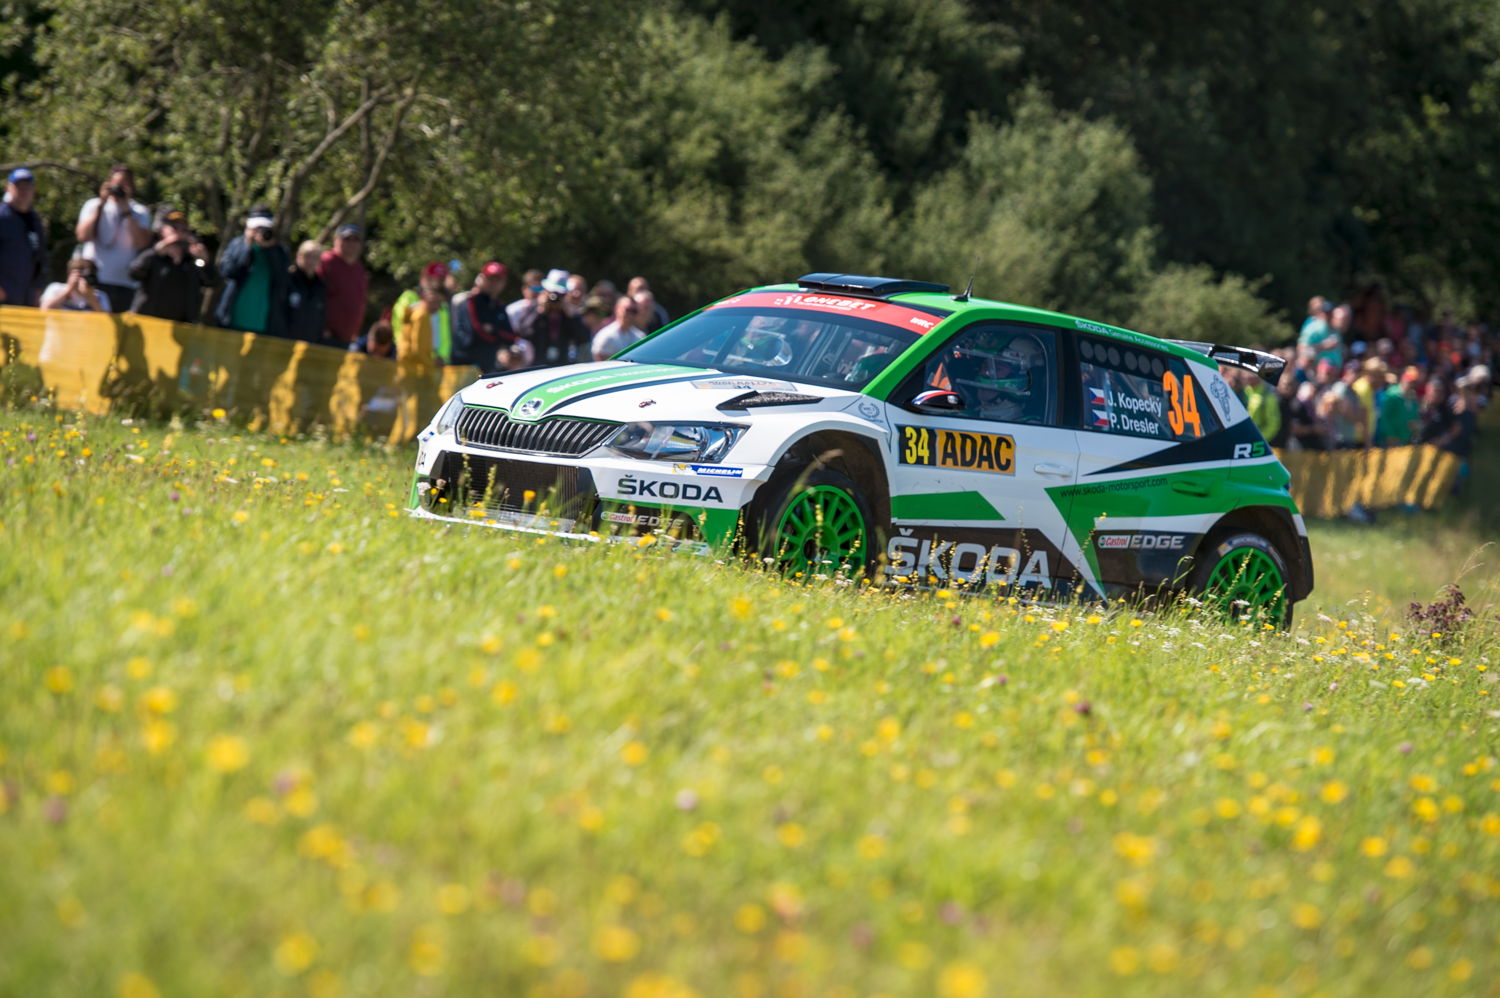 After five wins in a row at Czech Rally Championship, Jan Kopecký and Pavel Dresler (CZE/CZE), driving a ŠKODA FABIA R5, come as reigning champions to Barum Czech Rally Zlín.